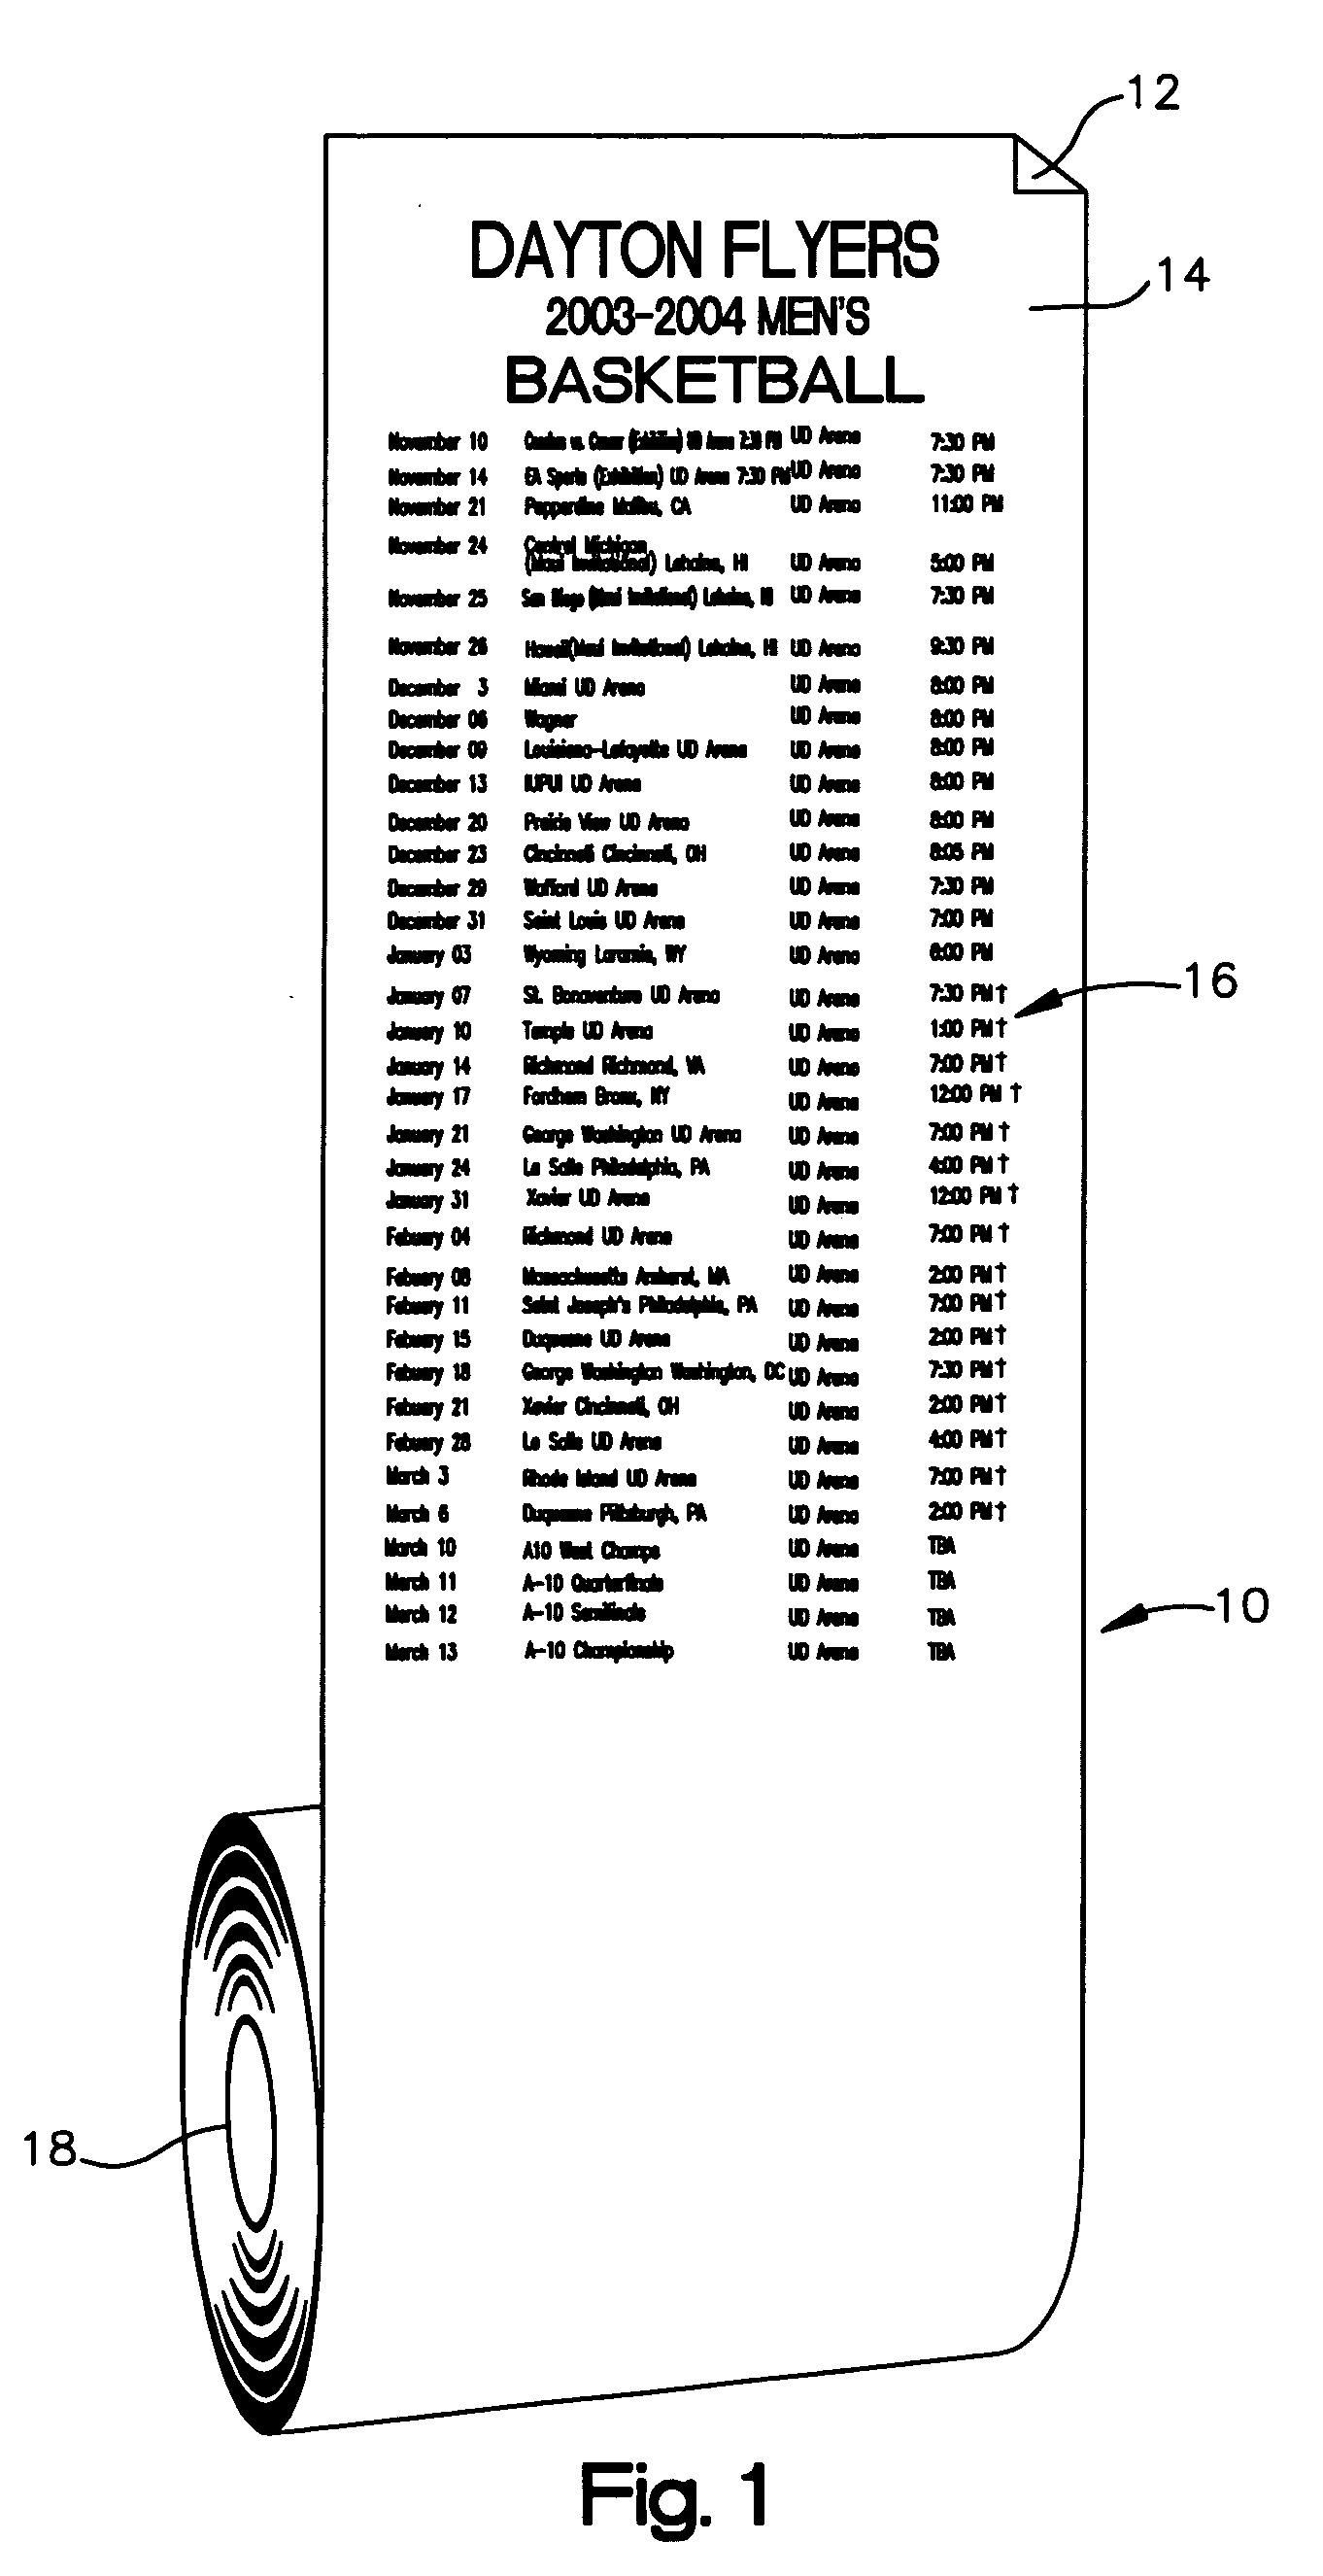 Distribution of sporting or event schedules with business machine receipt paper